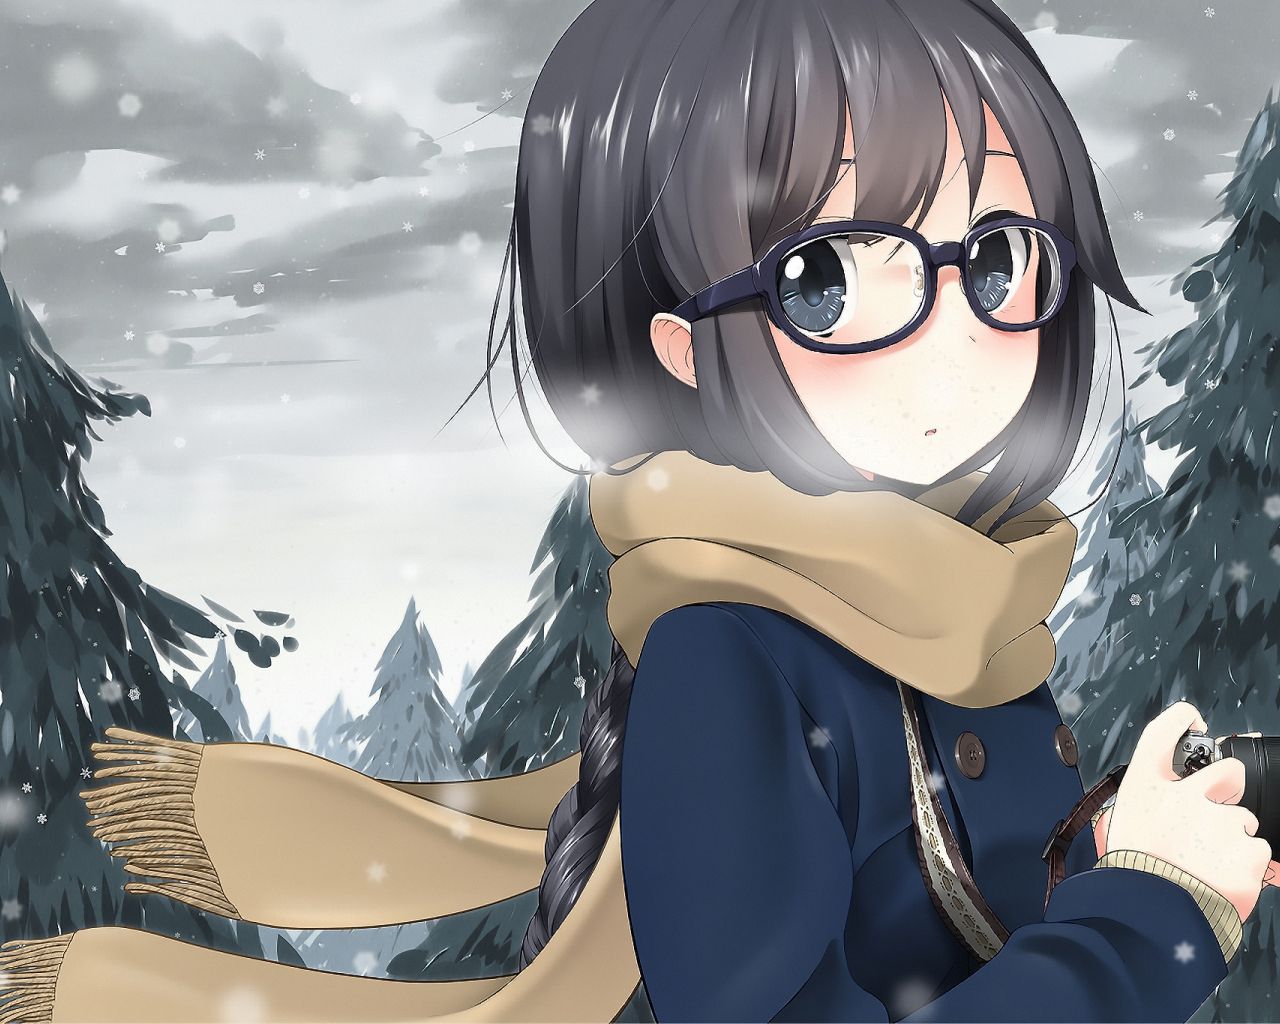 Desktop Wallpaper Glasses, Cute, Anime Girl, Photographer, Outdoor, HD Image, Picture, Background, 9b8cf0